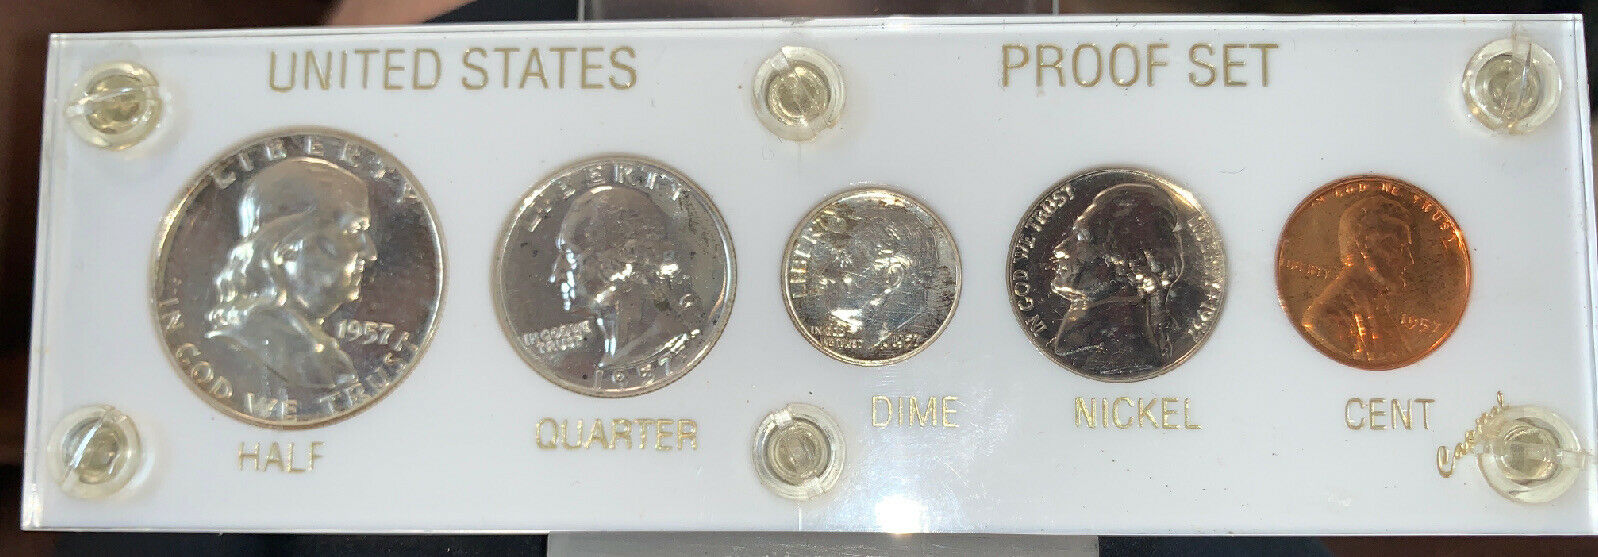 youtube us mint coins sets